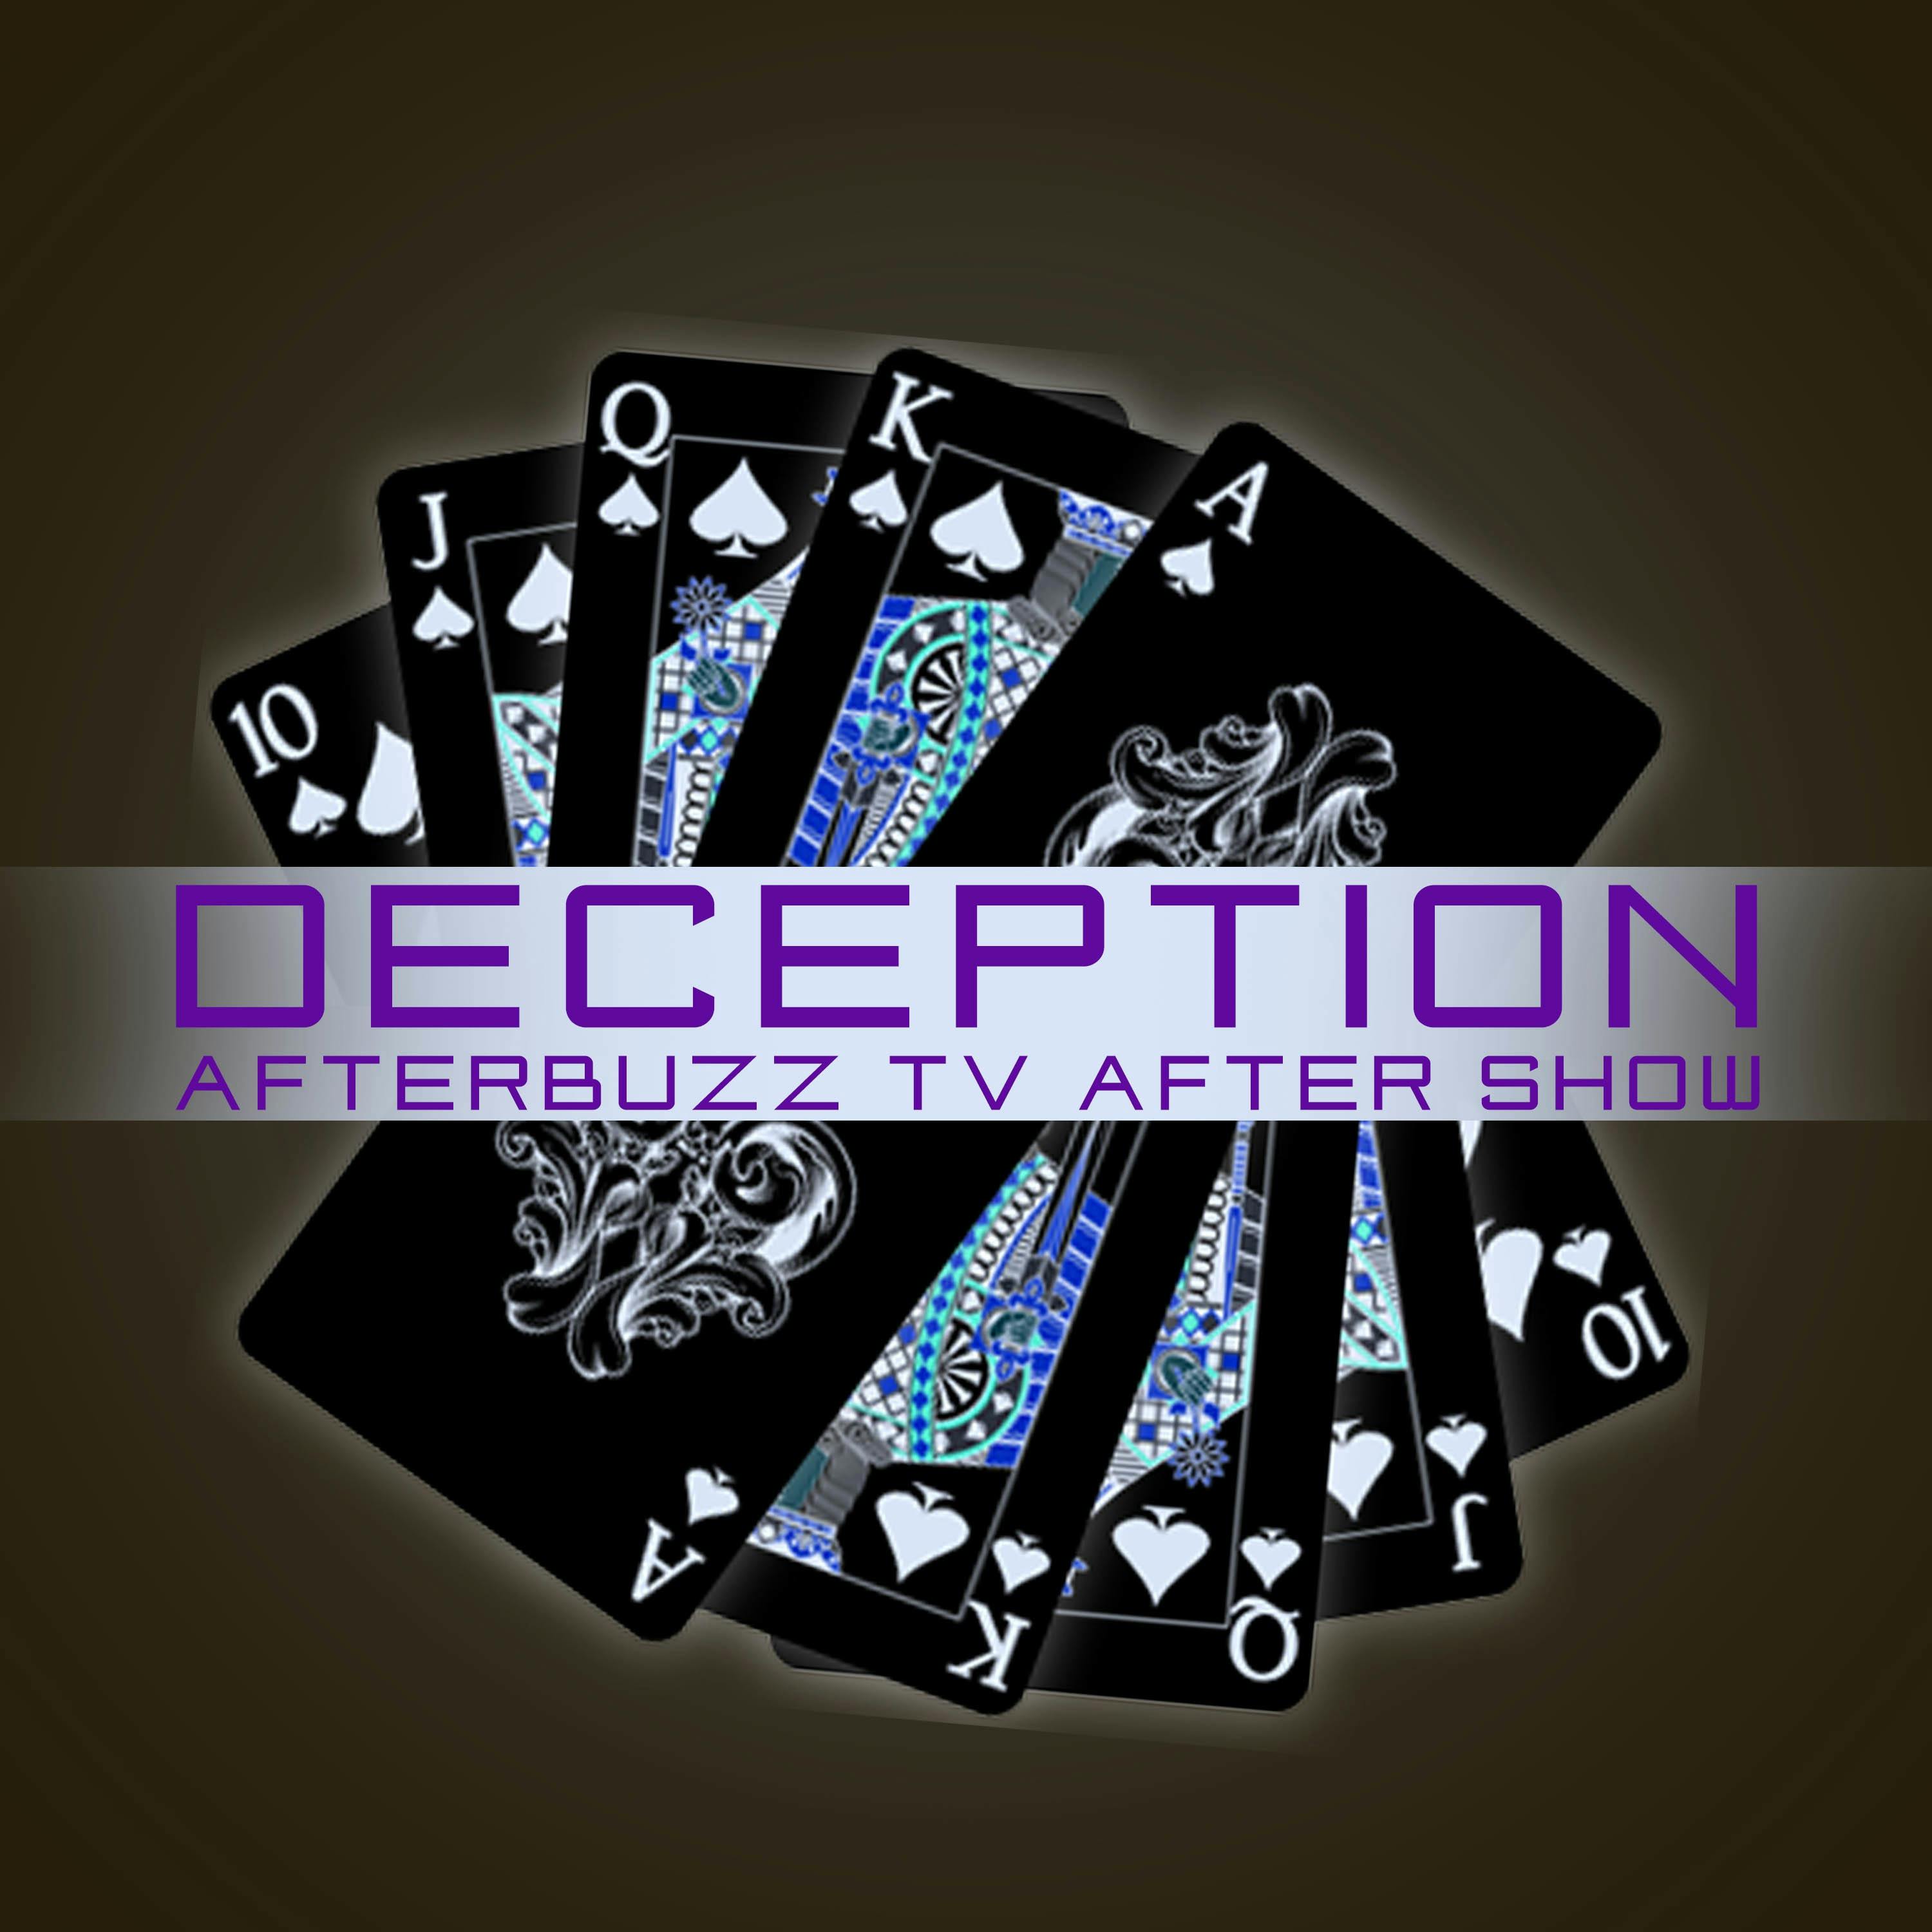 Deception S:1 | Loading Up E:11 | AfterBuzz TV AfterShow